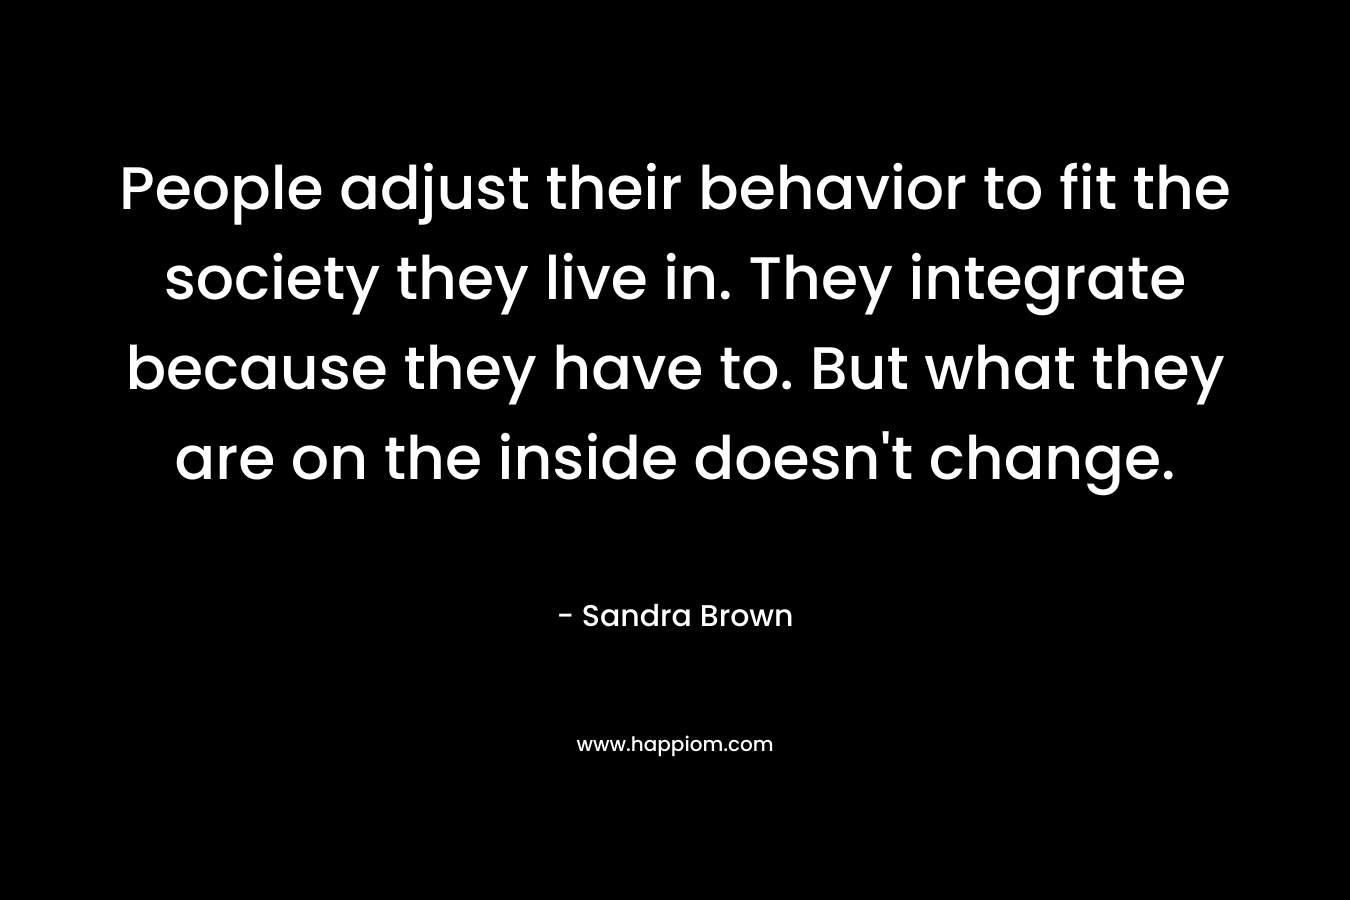 People adjust their behavior to fit the society they live in. They integrate because they have to. But what they are on the inside doesn't change.